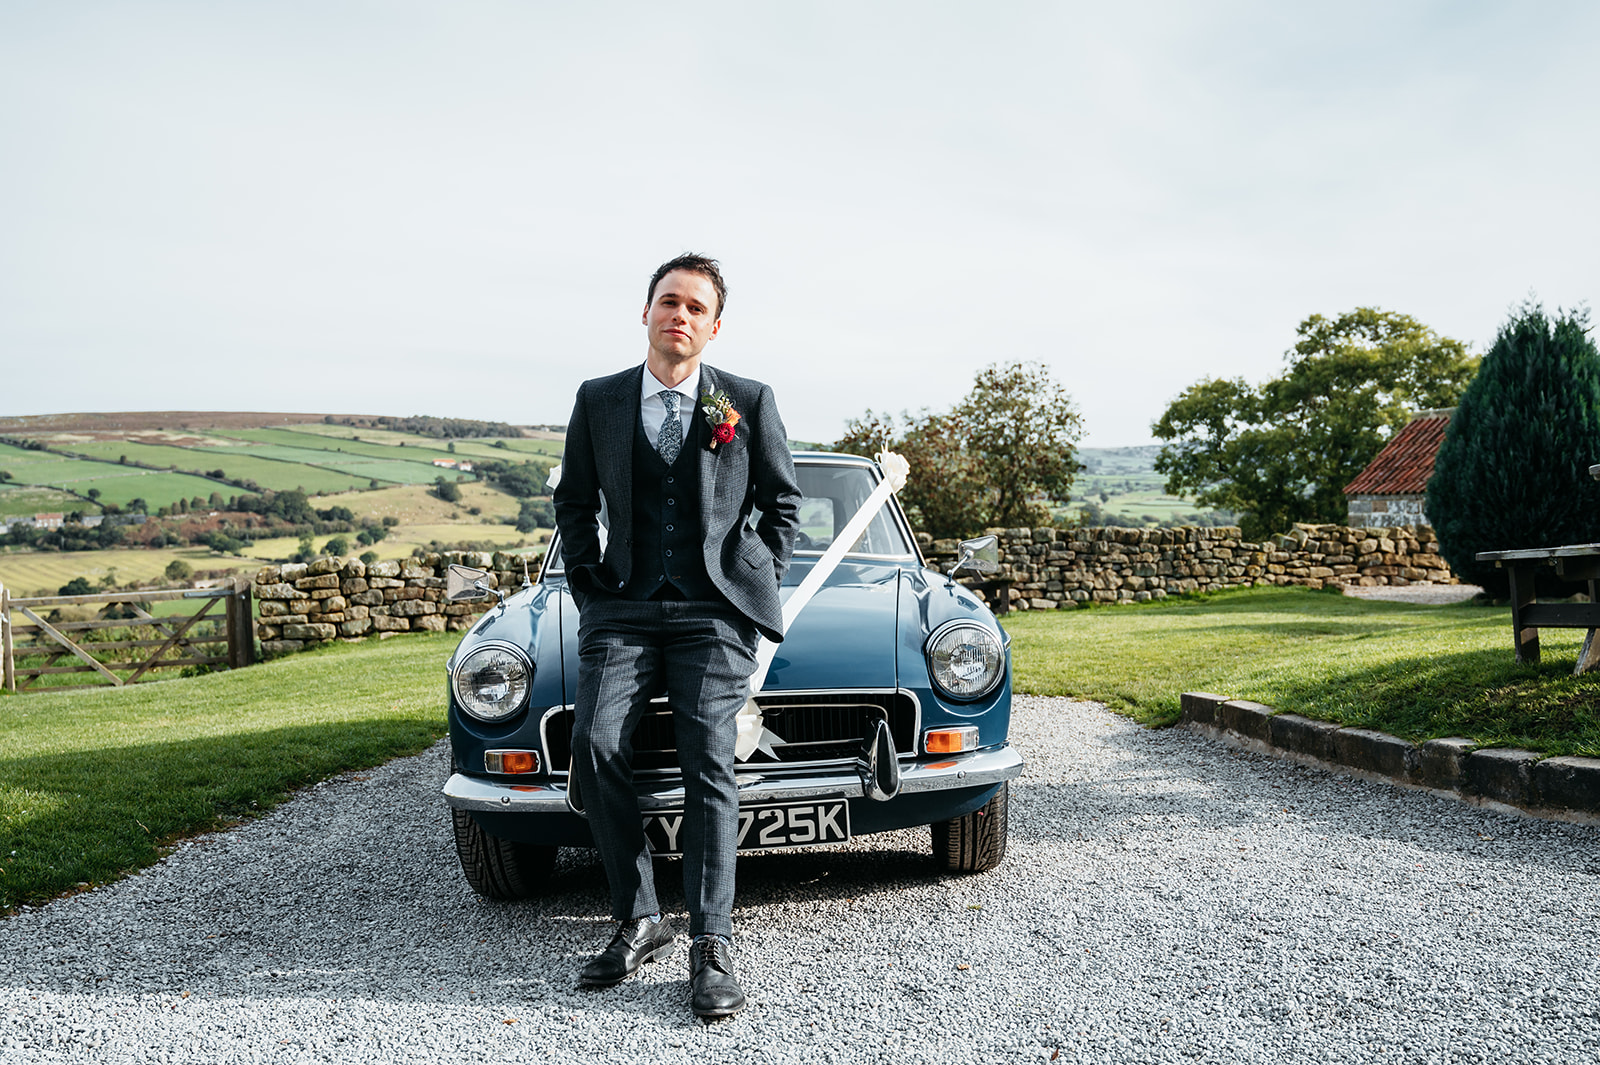 Ric standing in front of his wedding car